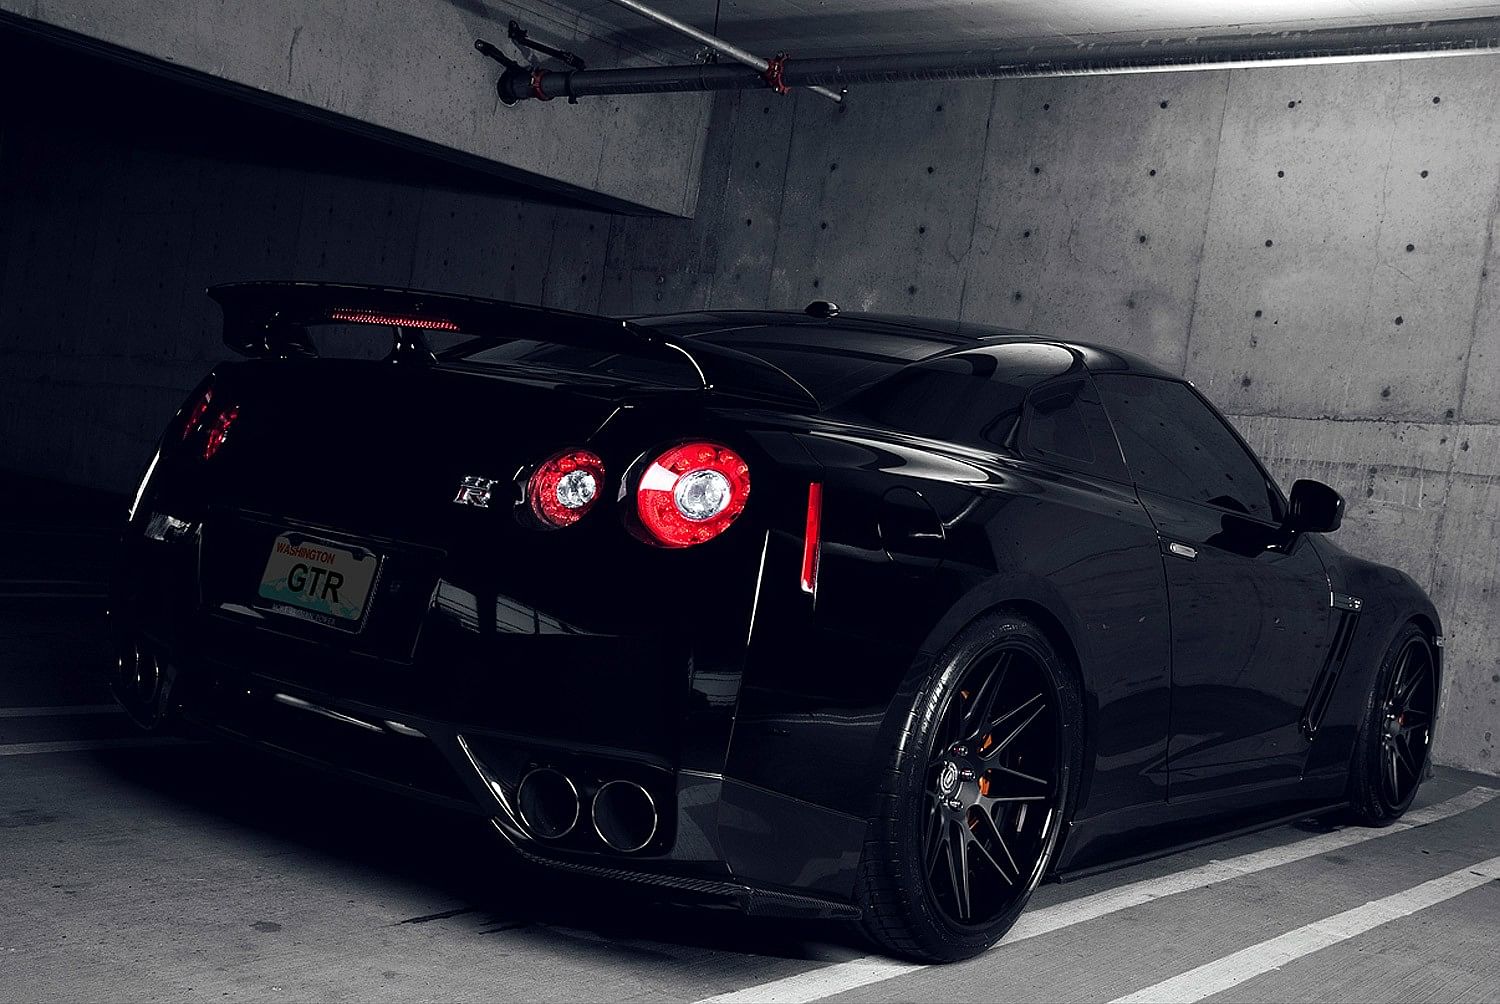 john abraham has his very own Nissan GTR black and its exclusive only one in india